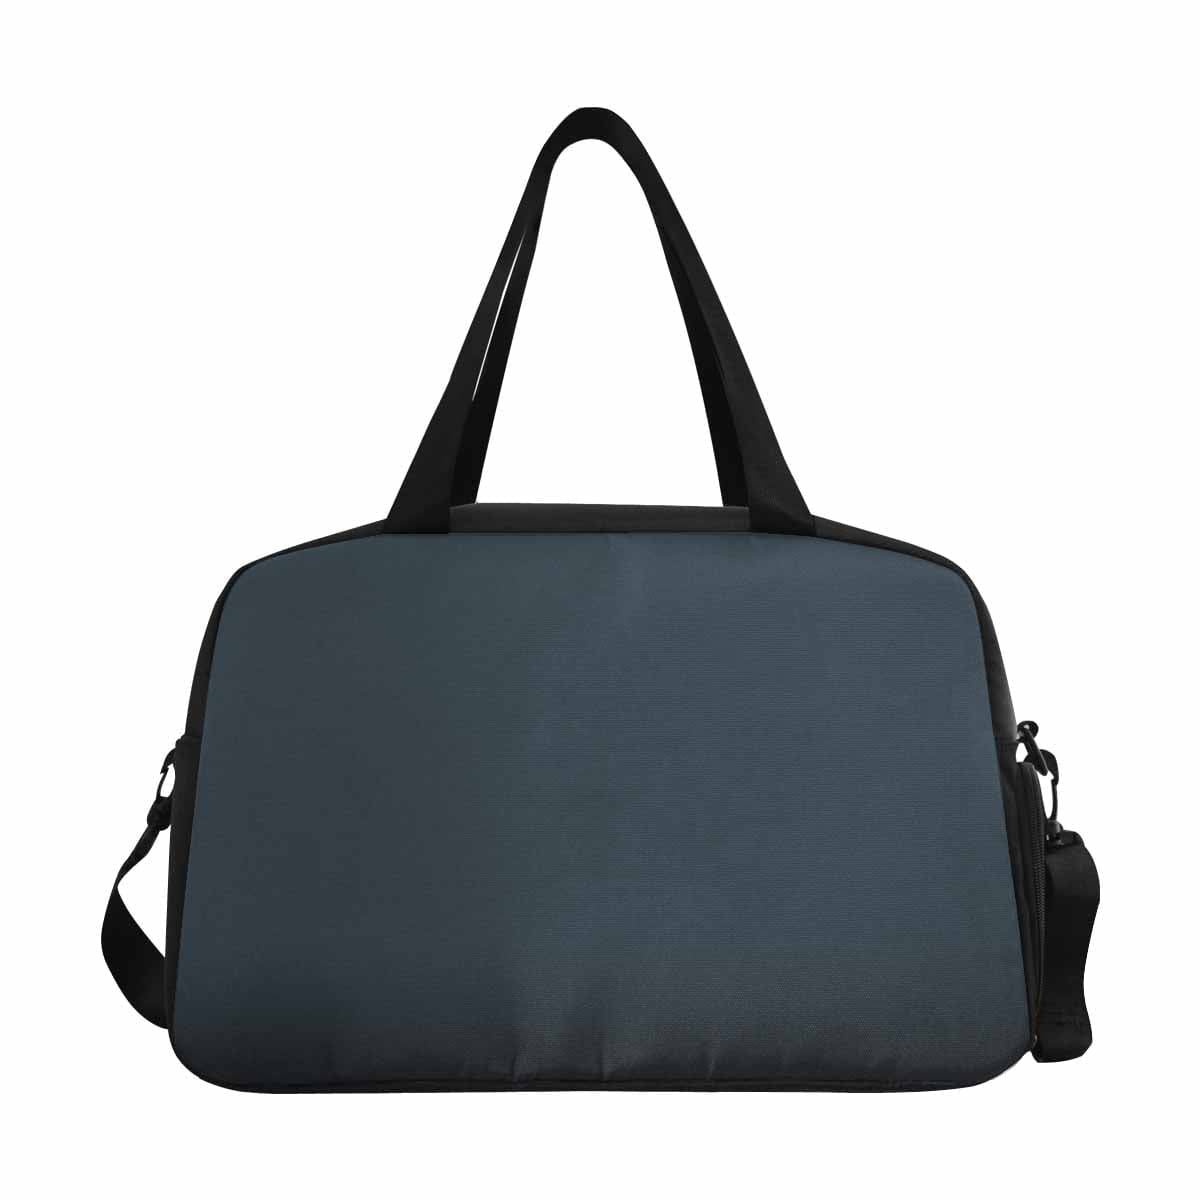 Charcoal Black Tote And Crossbody Travel Bag - Bags | Travel Bags | Crossbody